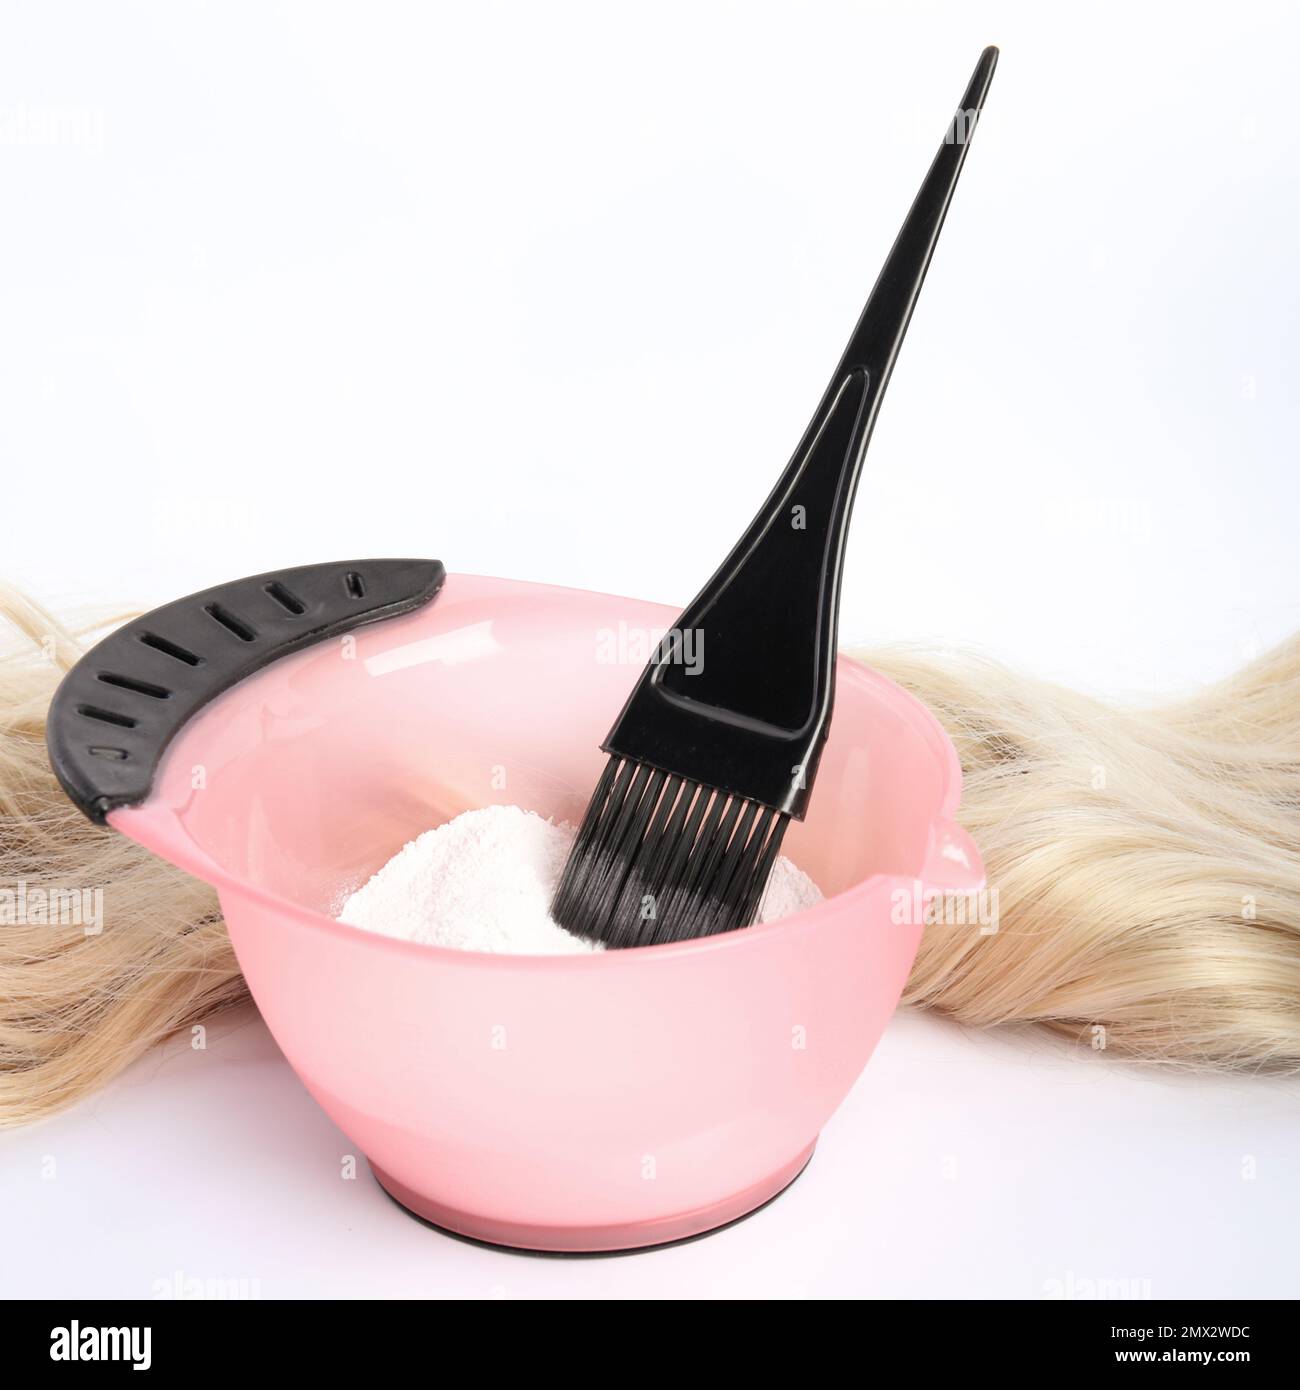 Mixing bowl and hair dye brush on electronic scale. Hair dye measuring and  mixing kit. Hair coloring tools set. Professional instrument for hair color  Stock Photo - Alamy